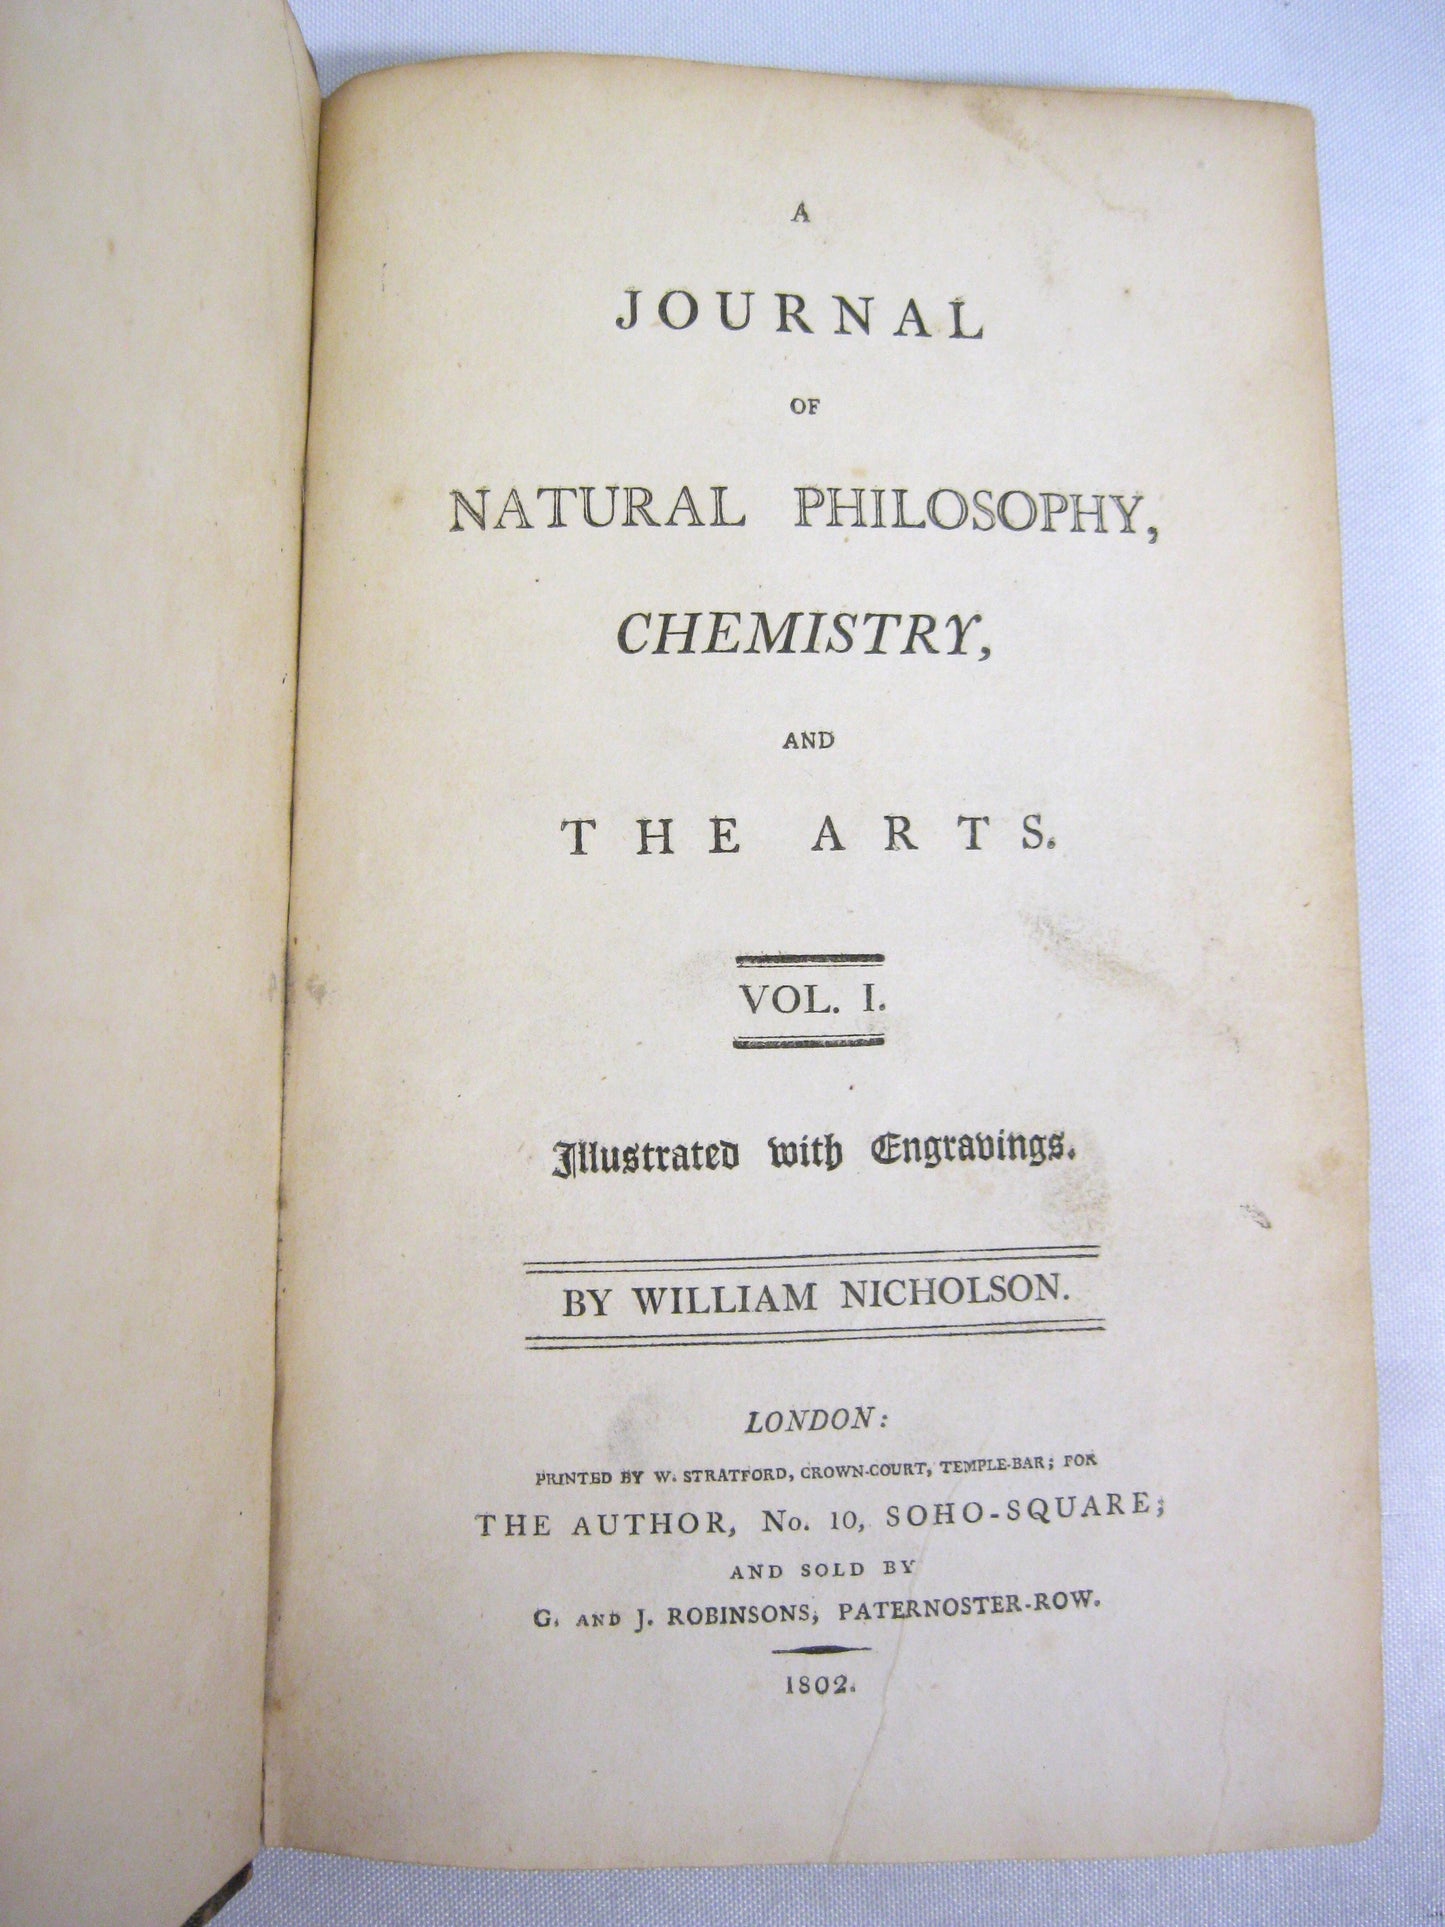 Journal of Natural Philosophy & The Arts Vol 1 by William Nicholson